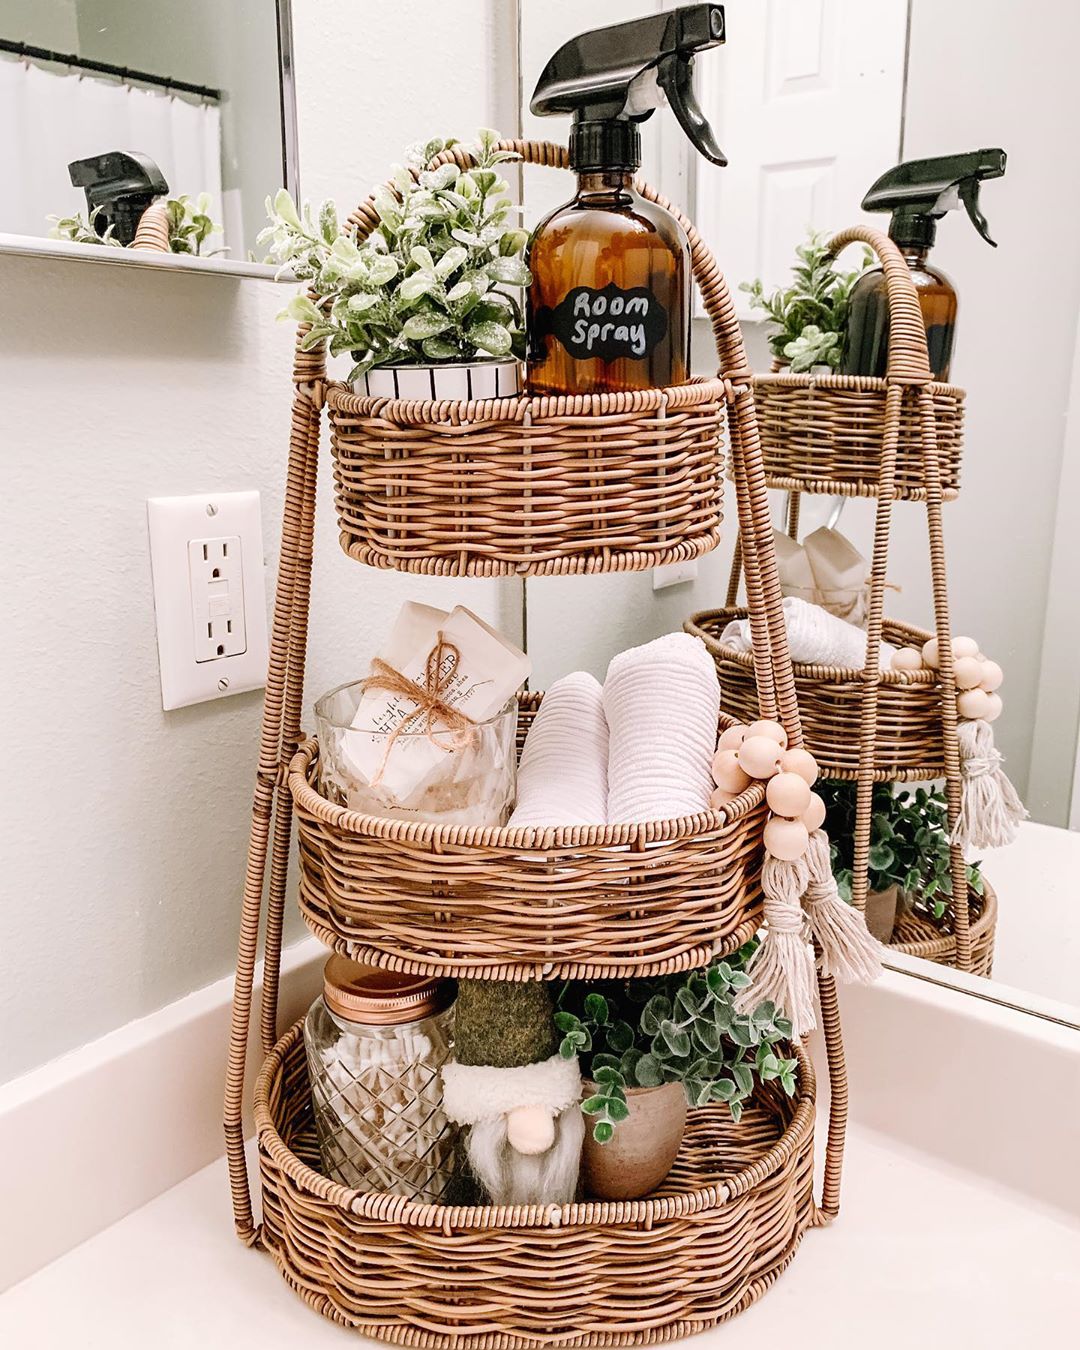 29 Bathroom Organization Ideas To Help You Get More Space